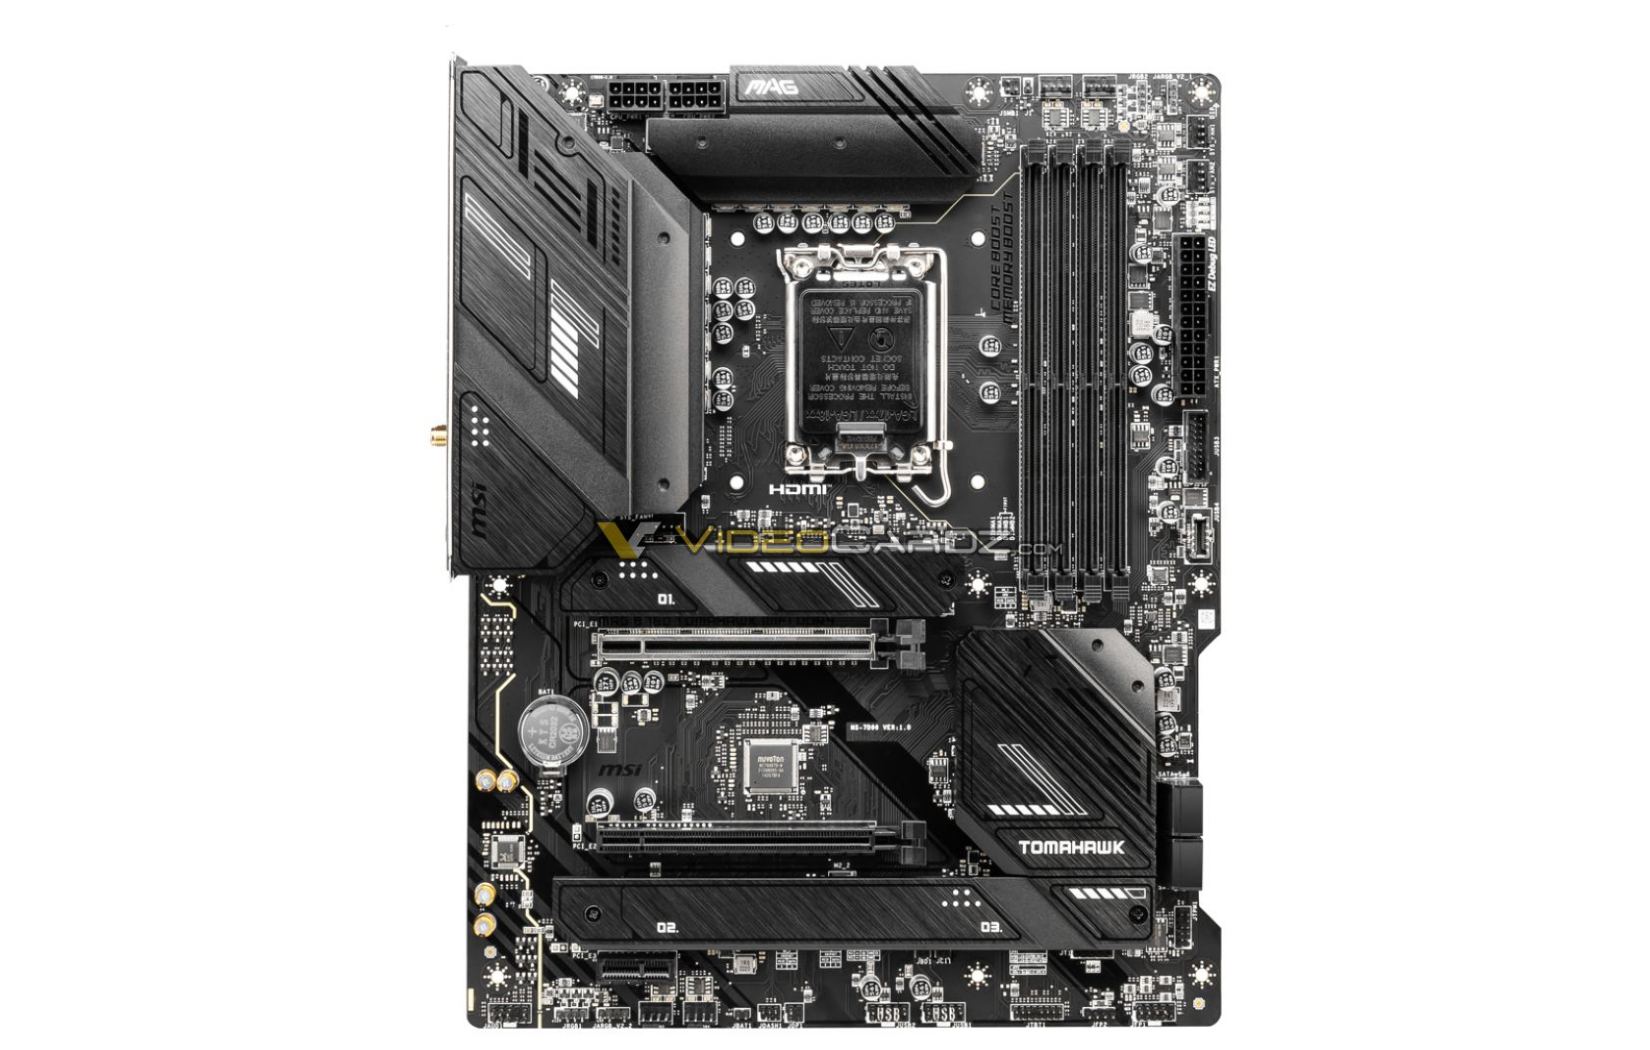 Budget Intel B760 motherboards from Gigabyte and MSI have been pictured 